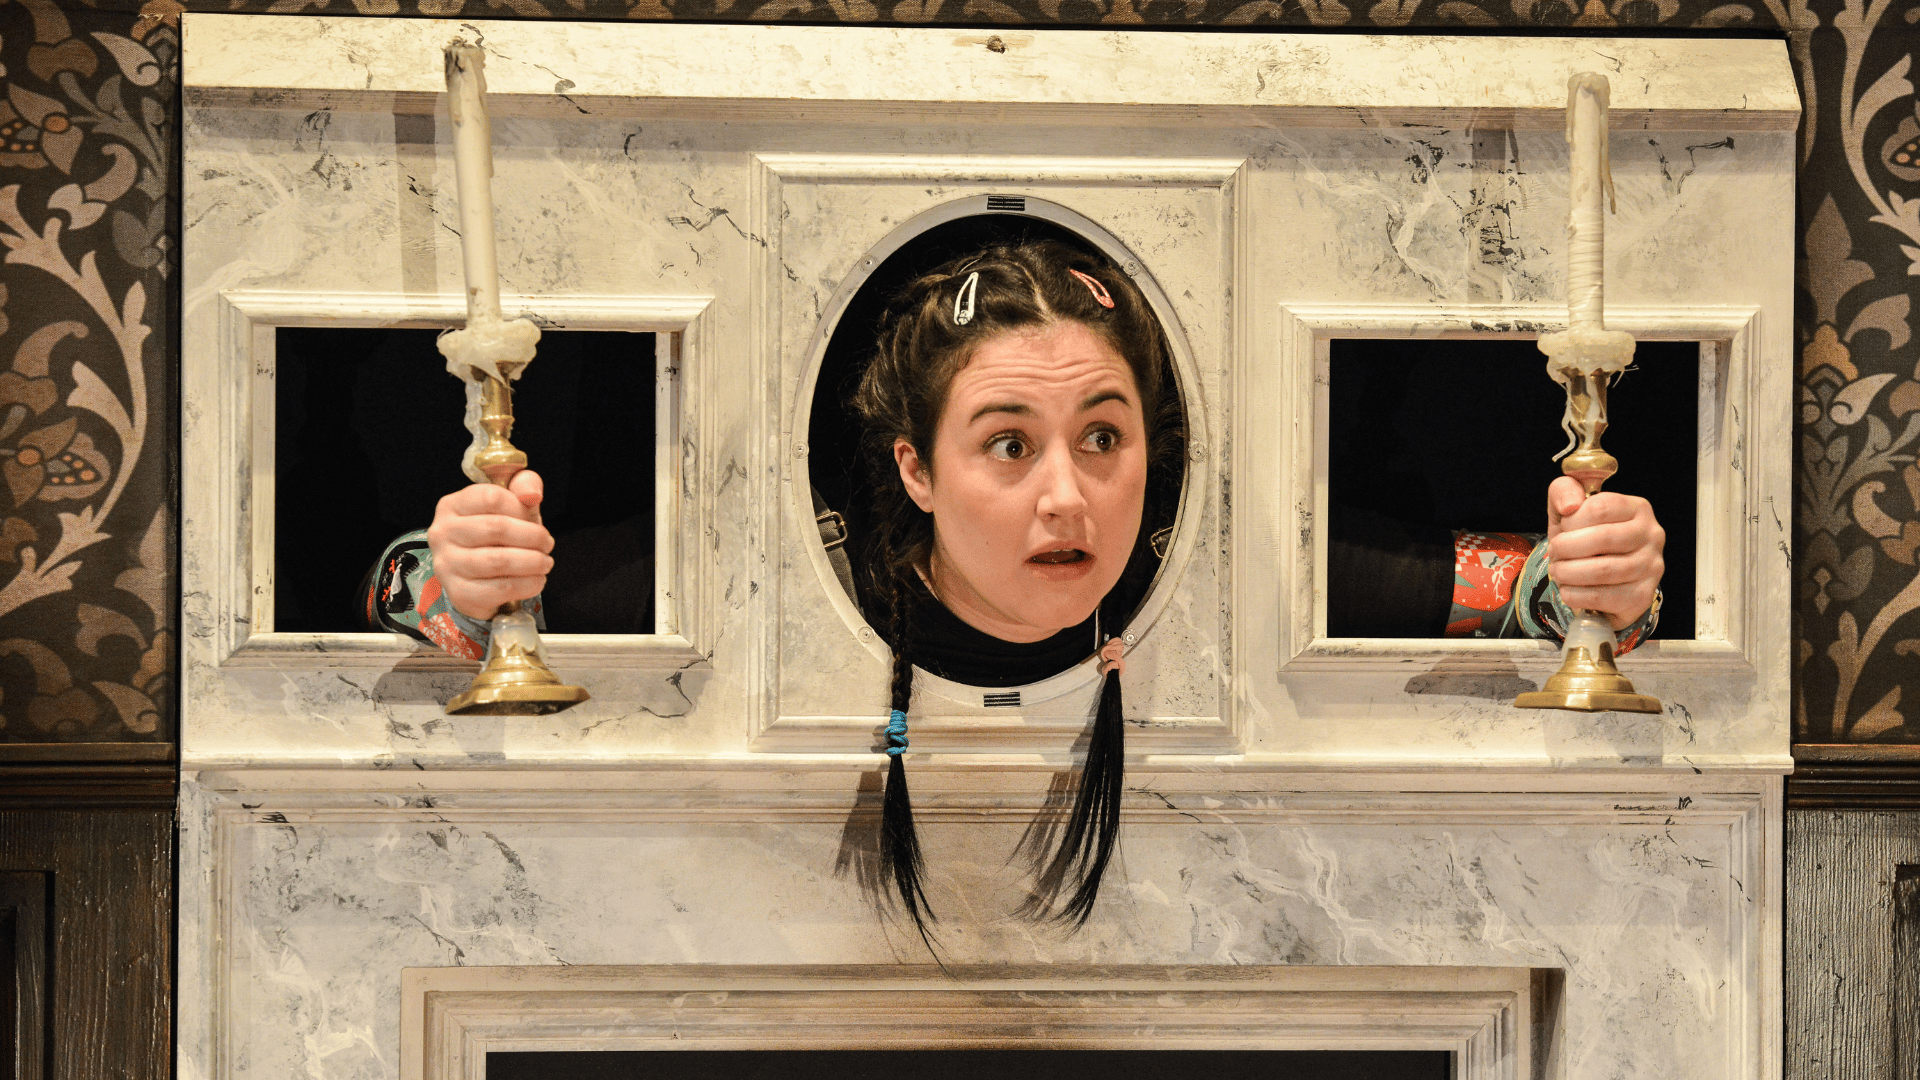 The Play That Goes Wrong Production Shot: A close up of Annie (Laura Kirman) who is stuck in a fireplace mantle piece, with her head through the middle hole and her arms through holes either side of her holding candlesticks.